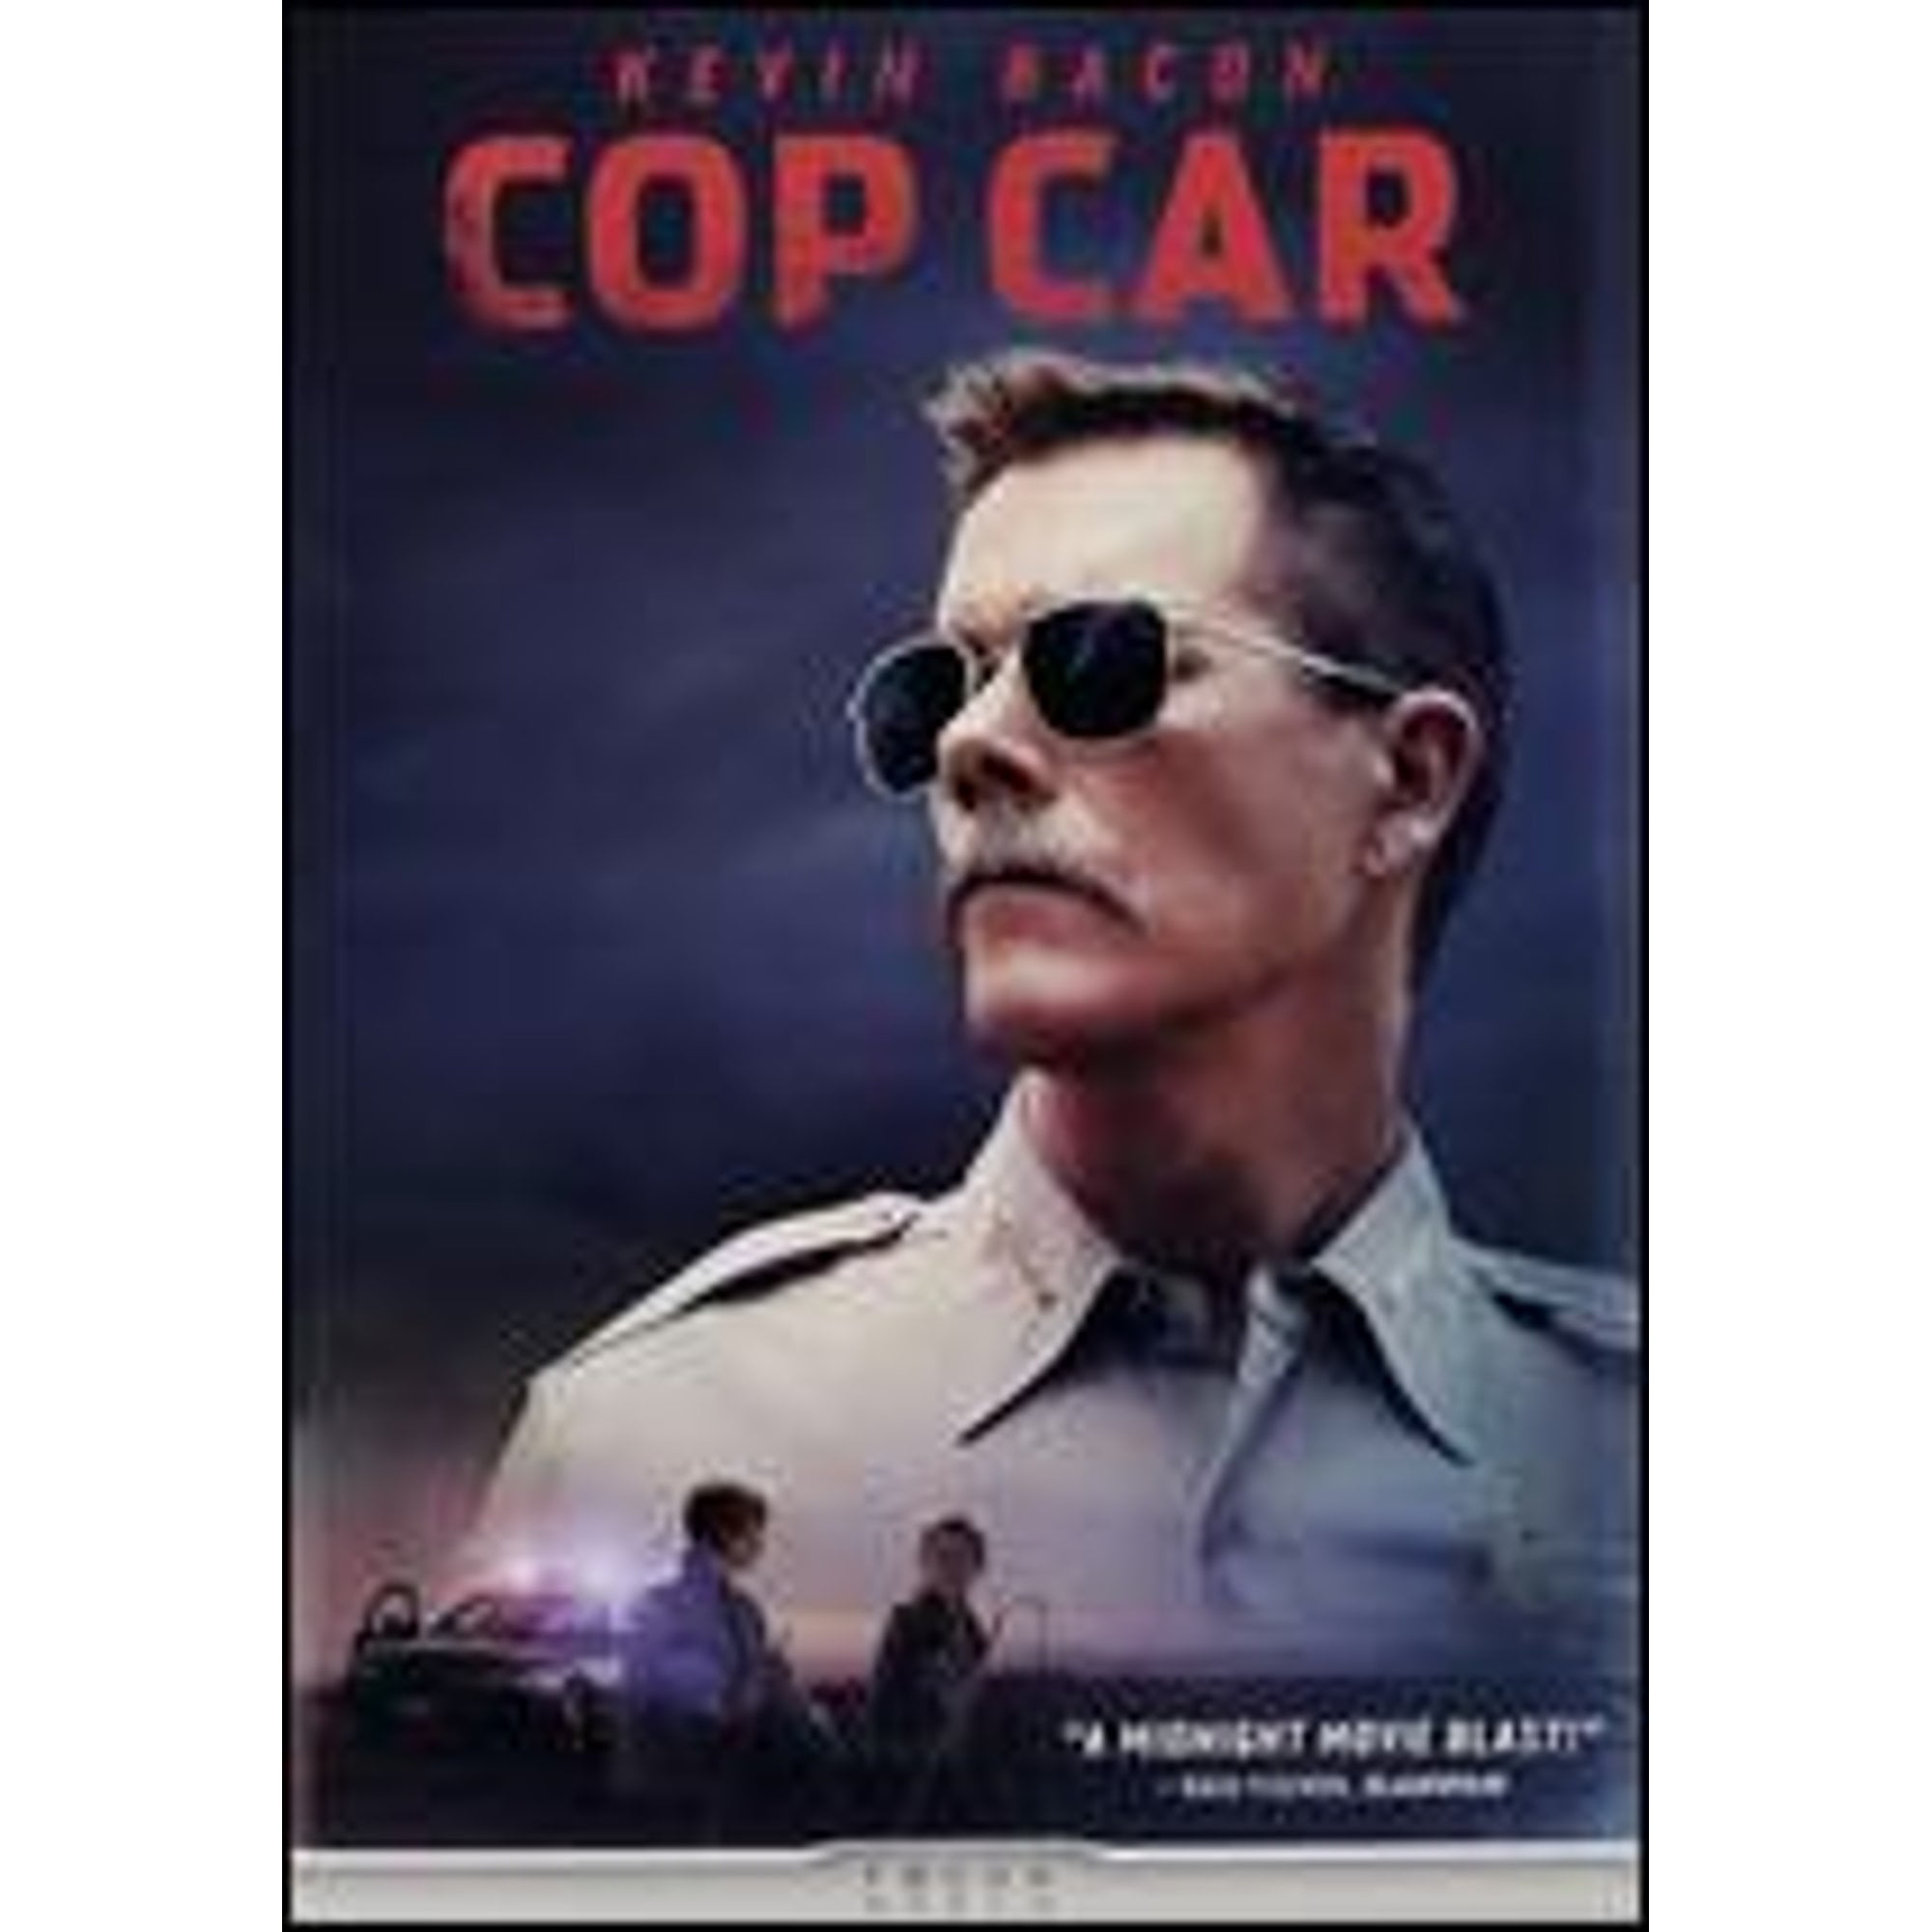 Pre-Owned Cop Car (DVD 0025192301964) directed by Jon Watts